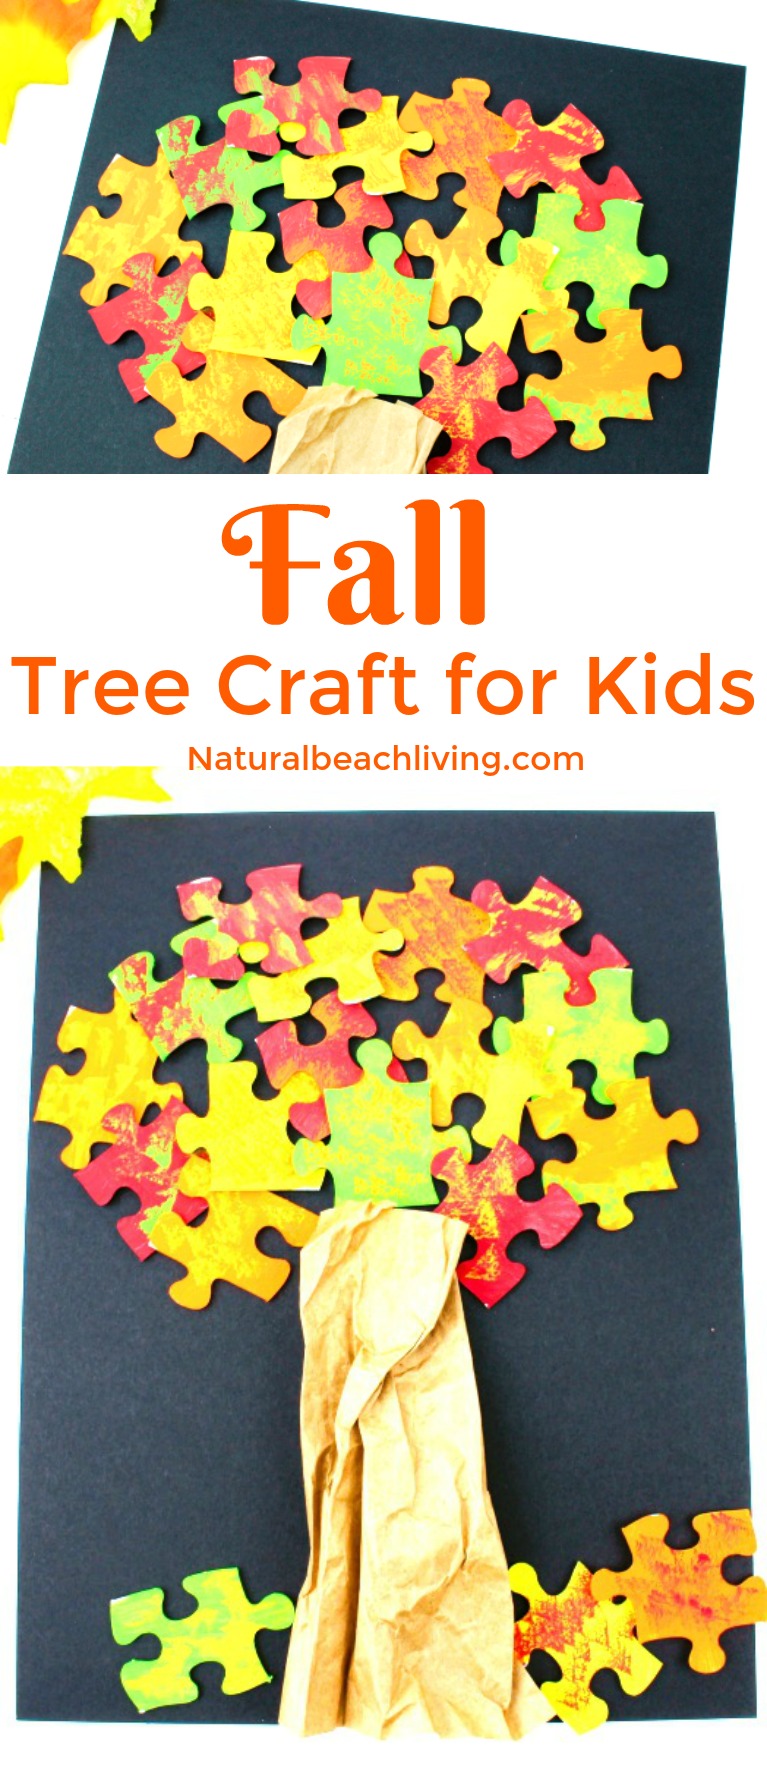 Bring the beauty of fall indoors with these 25 Leaf Crafts for Kids. These fun seasonal craft projects are perfect for kids to make themselves or in a classroom. Craft with real leaves and sticks to create beautiful artwork and colorful displays for autumn. Fall Crafts for Kids and Easy fall leaf craft activities